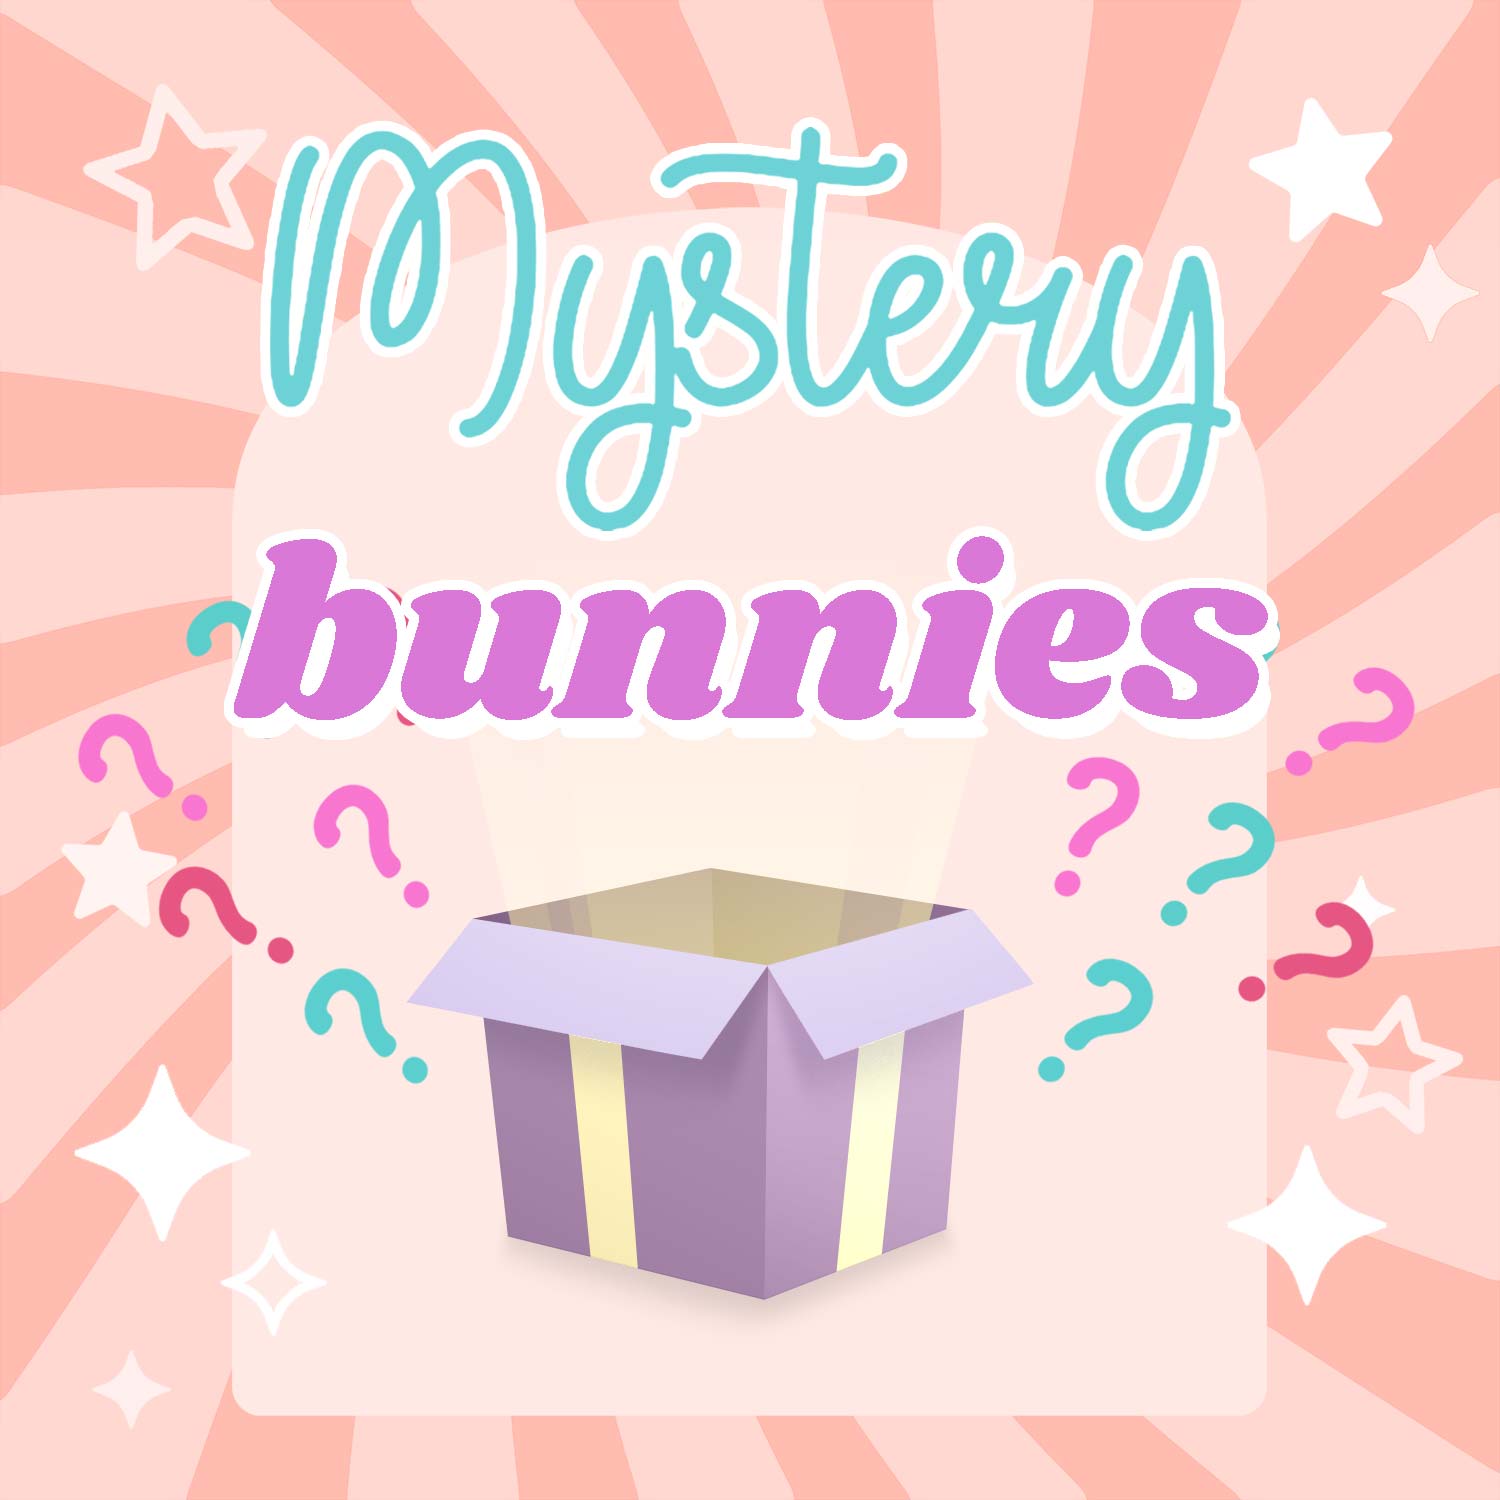 Mystery Bunny 3-Pack Brooches & Lapel Pins Flair Fighter   